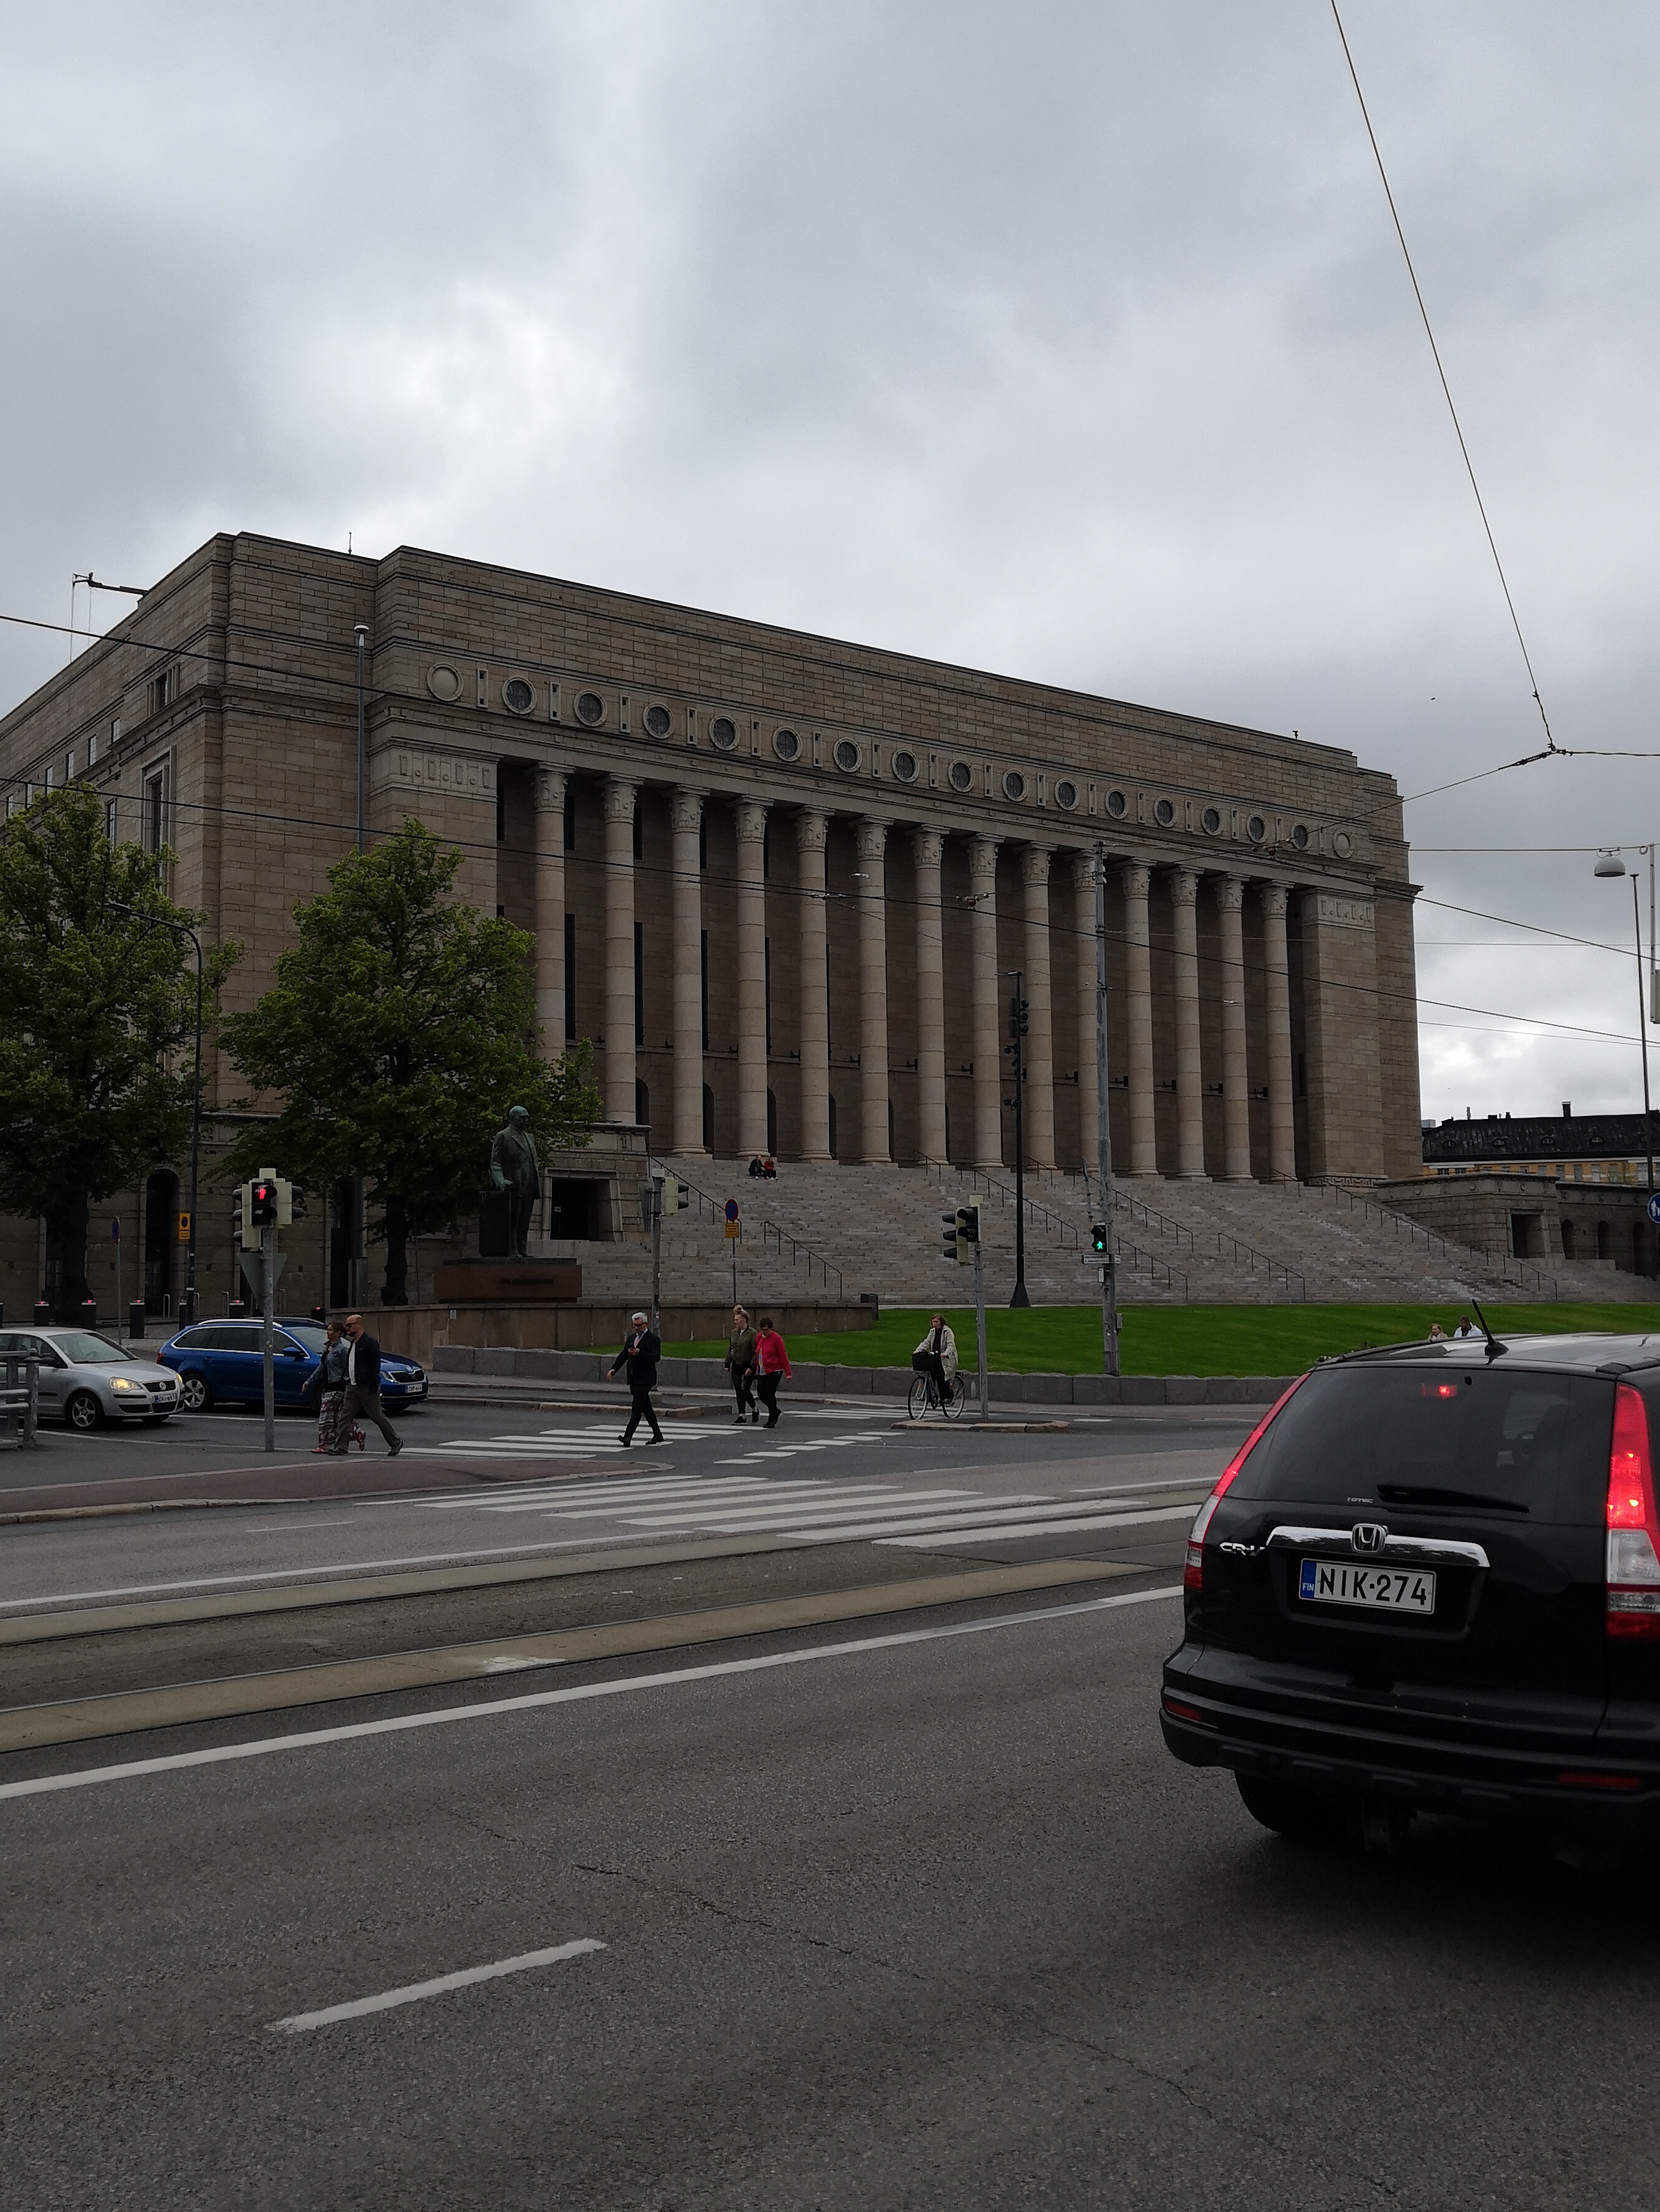 The Parliament House of Finland, 1945 rephoto